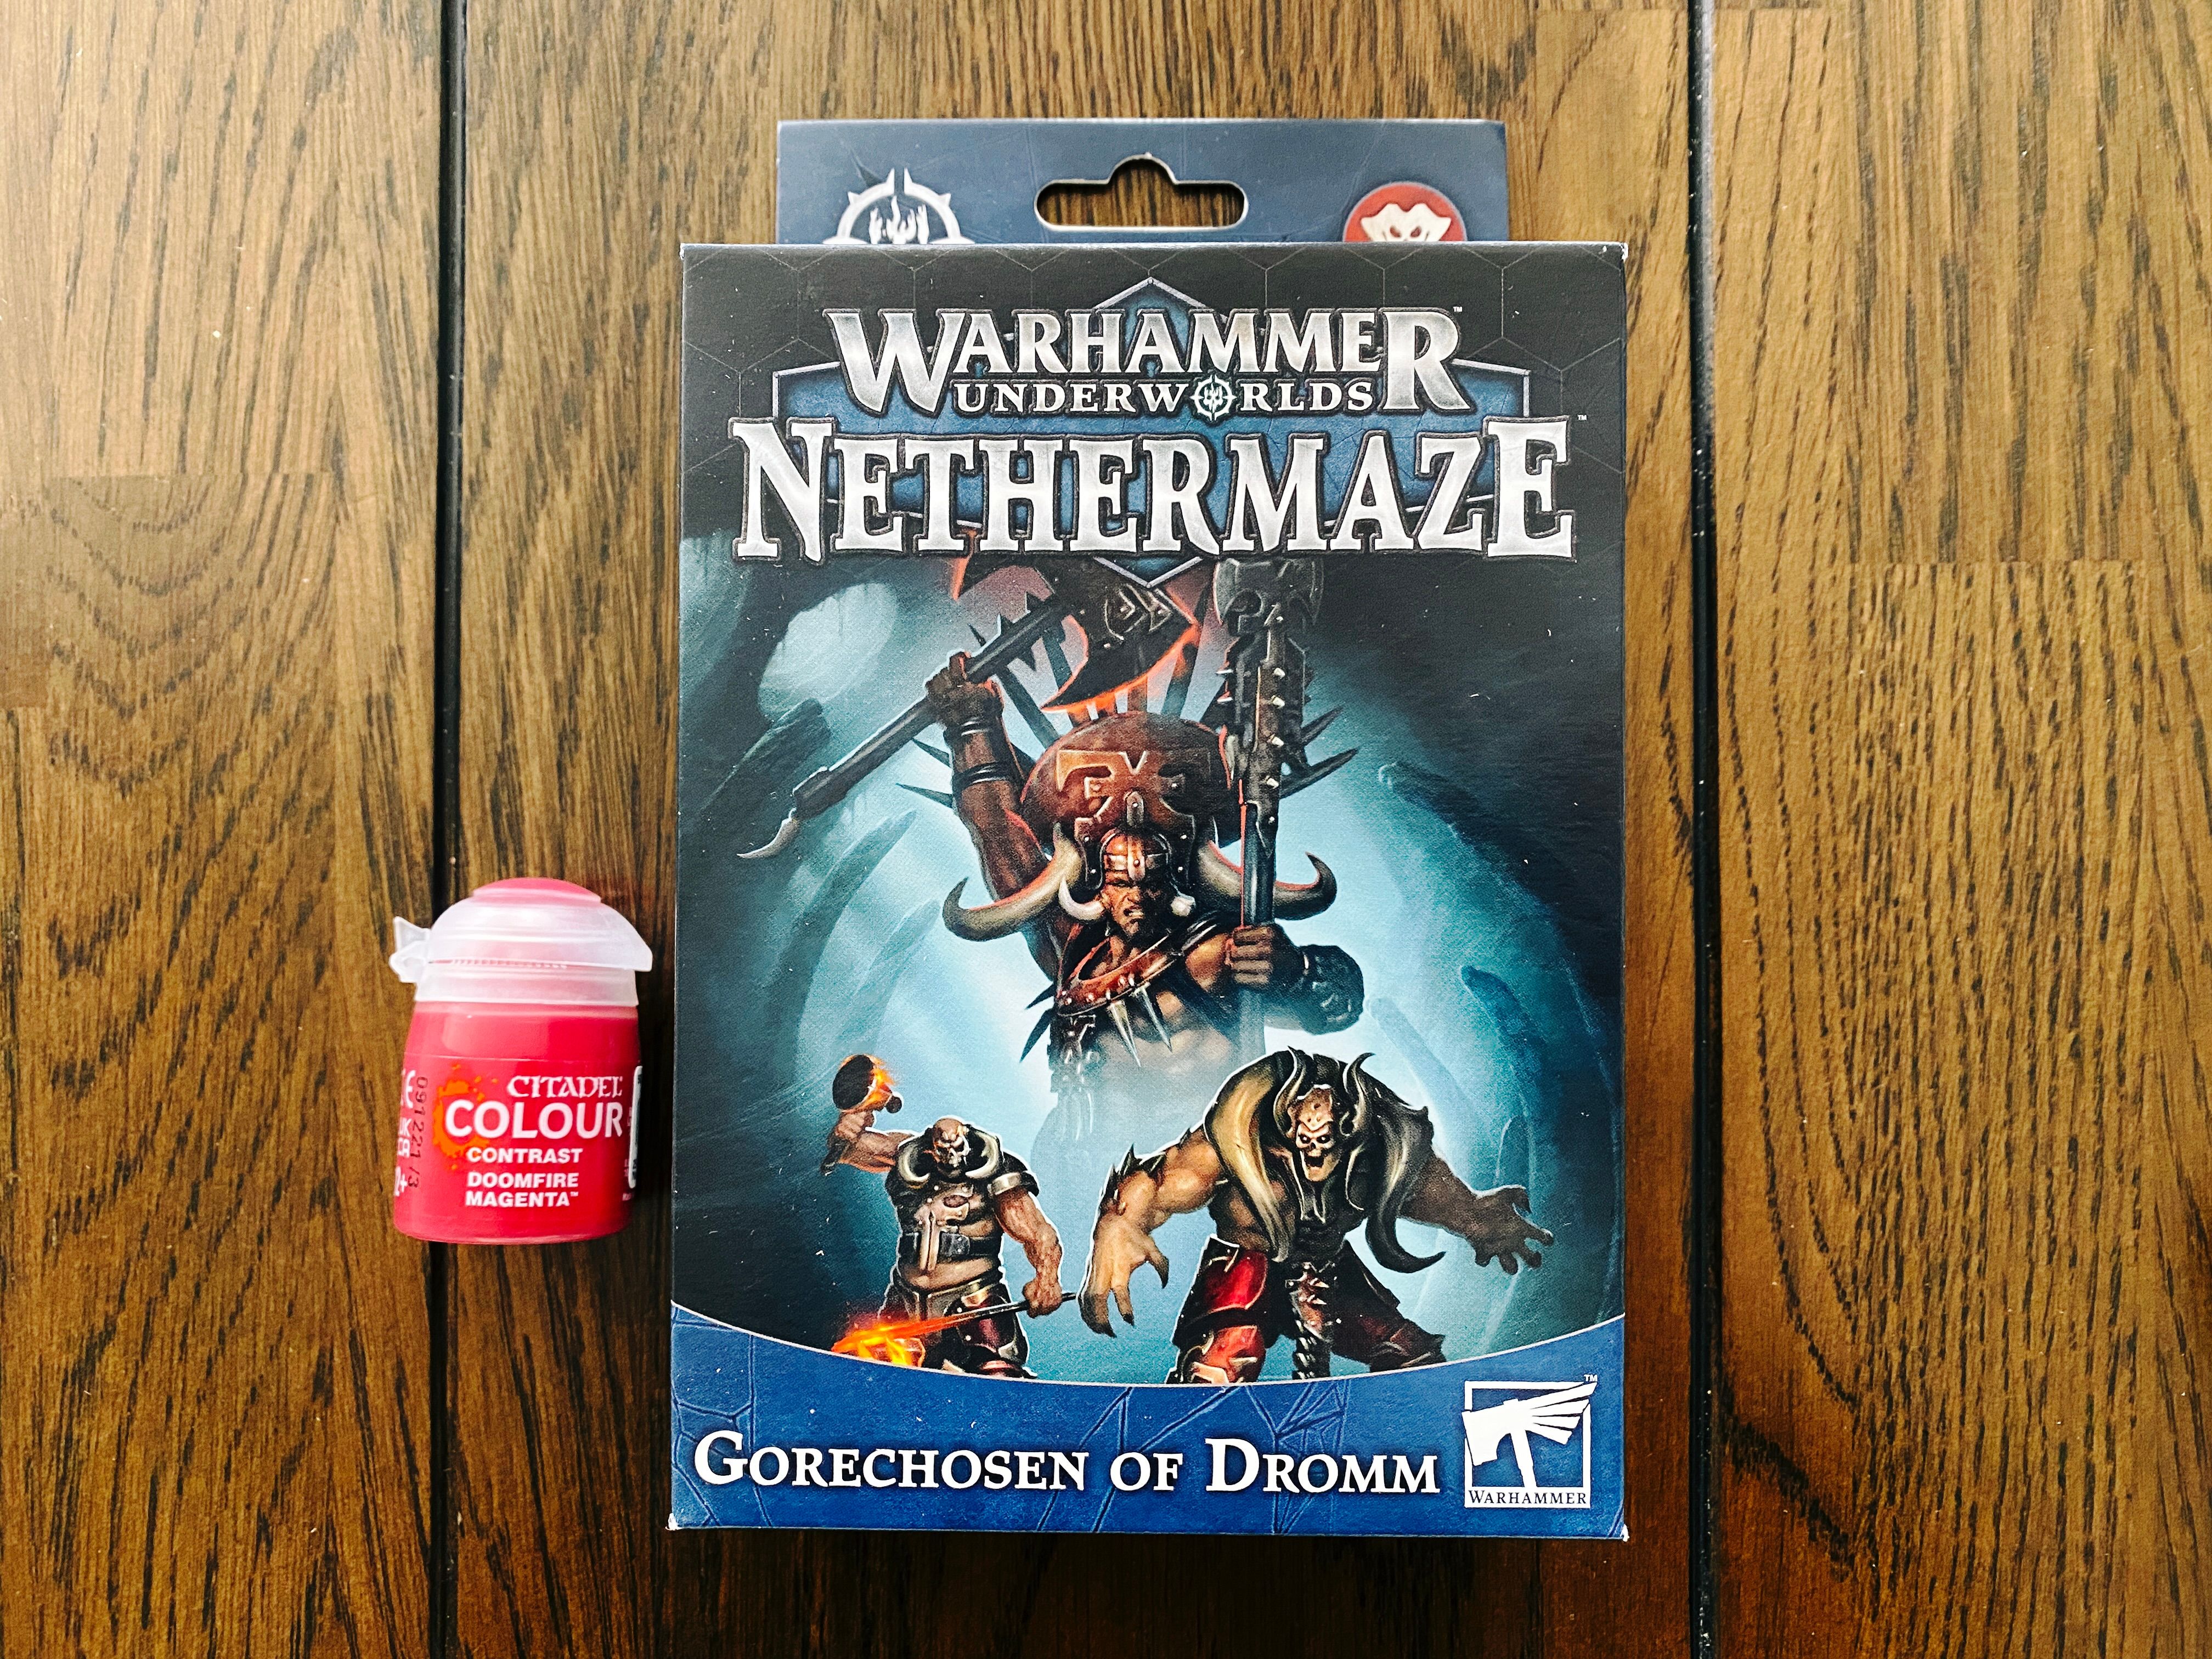 A photo of the box of the Warhammer Underworlds warband "Gorechosen of Dromm". The art on the front is three beefcake dudes, one's got a big ceremonial headdress on and is wielding an axe and a staff, one has very Immortan Joe from Max Mad vibes, and the other is part demon with absurdly large arms and big horns over his shoulders.